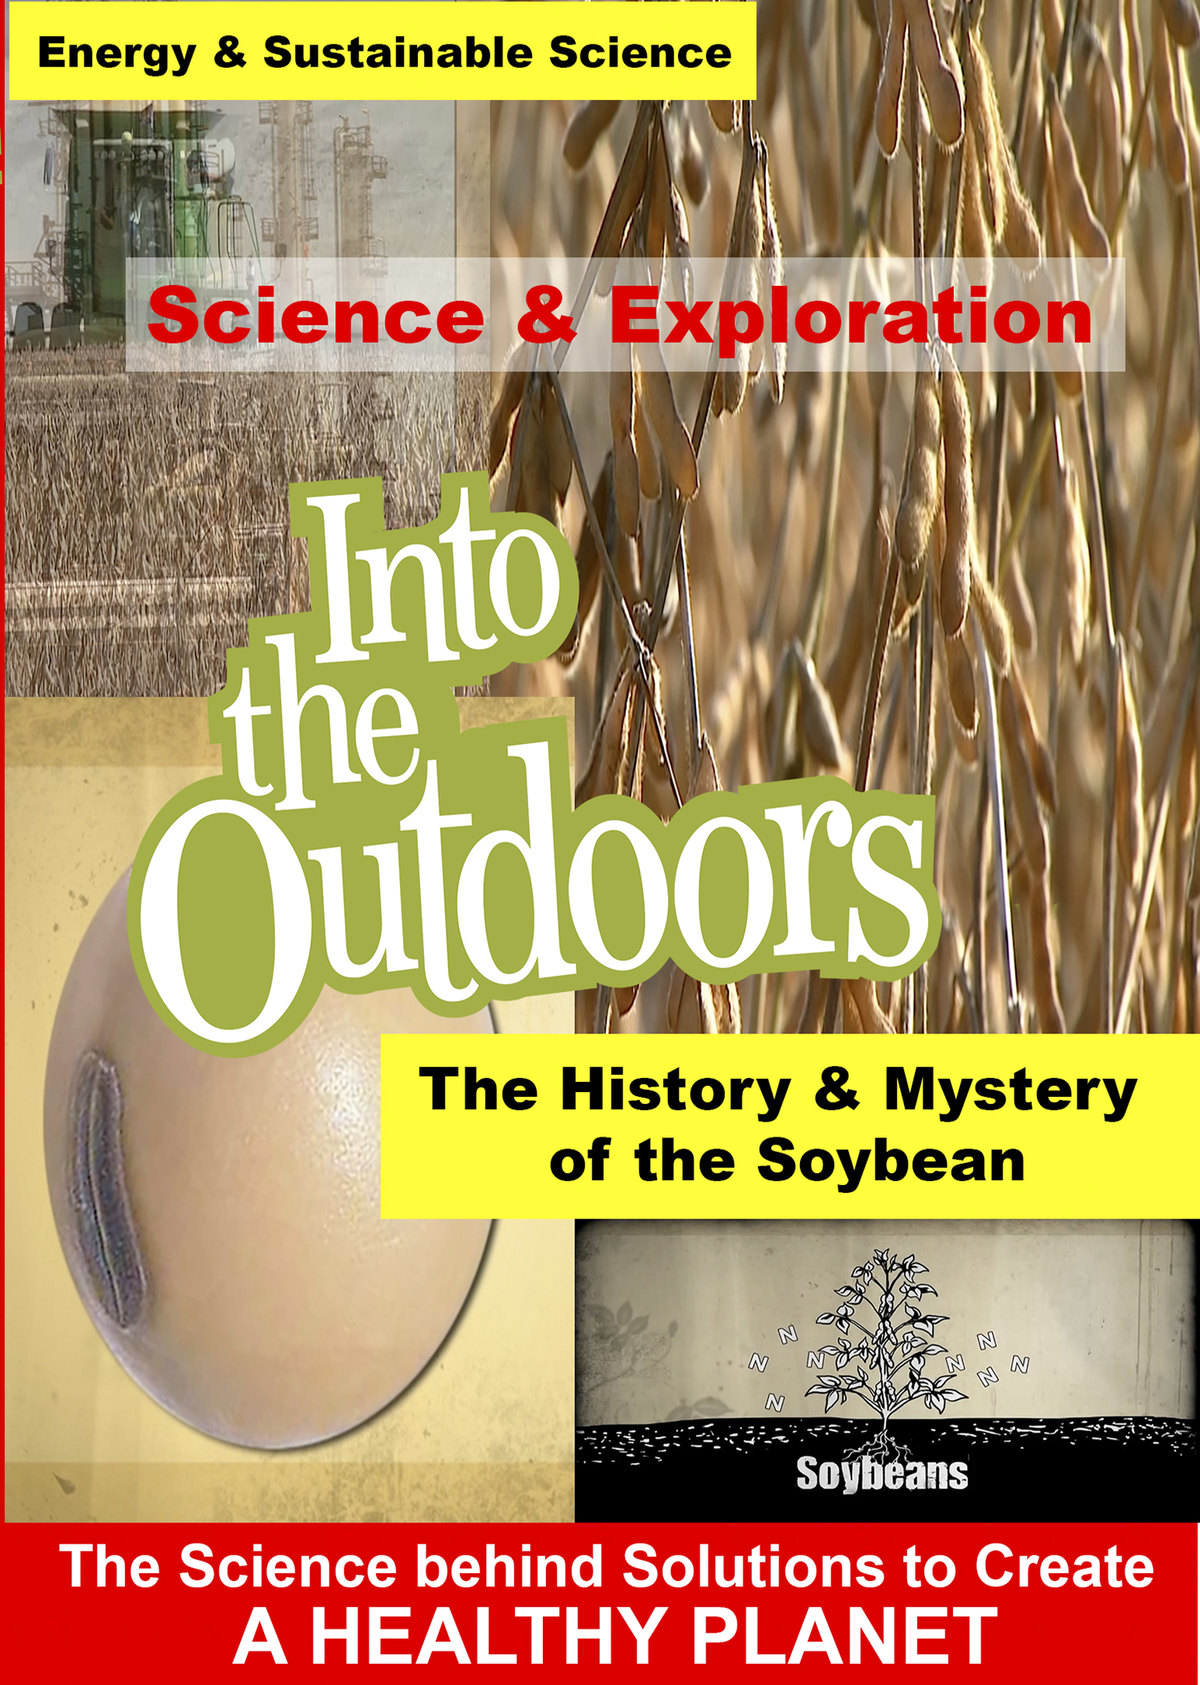 K5001 - The History & Mystery of the Soybean